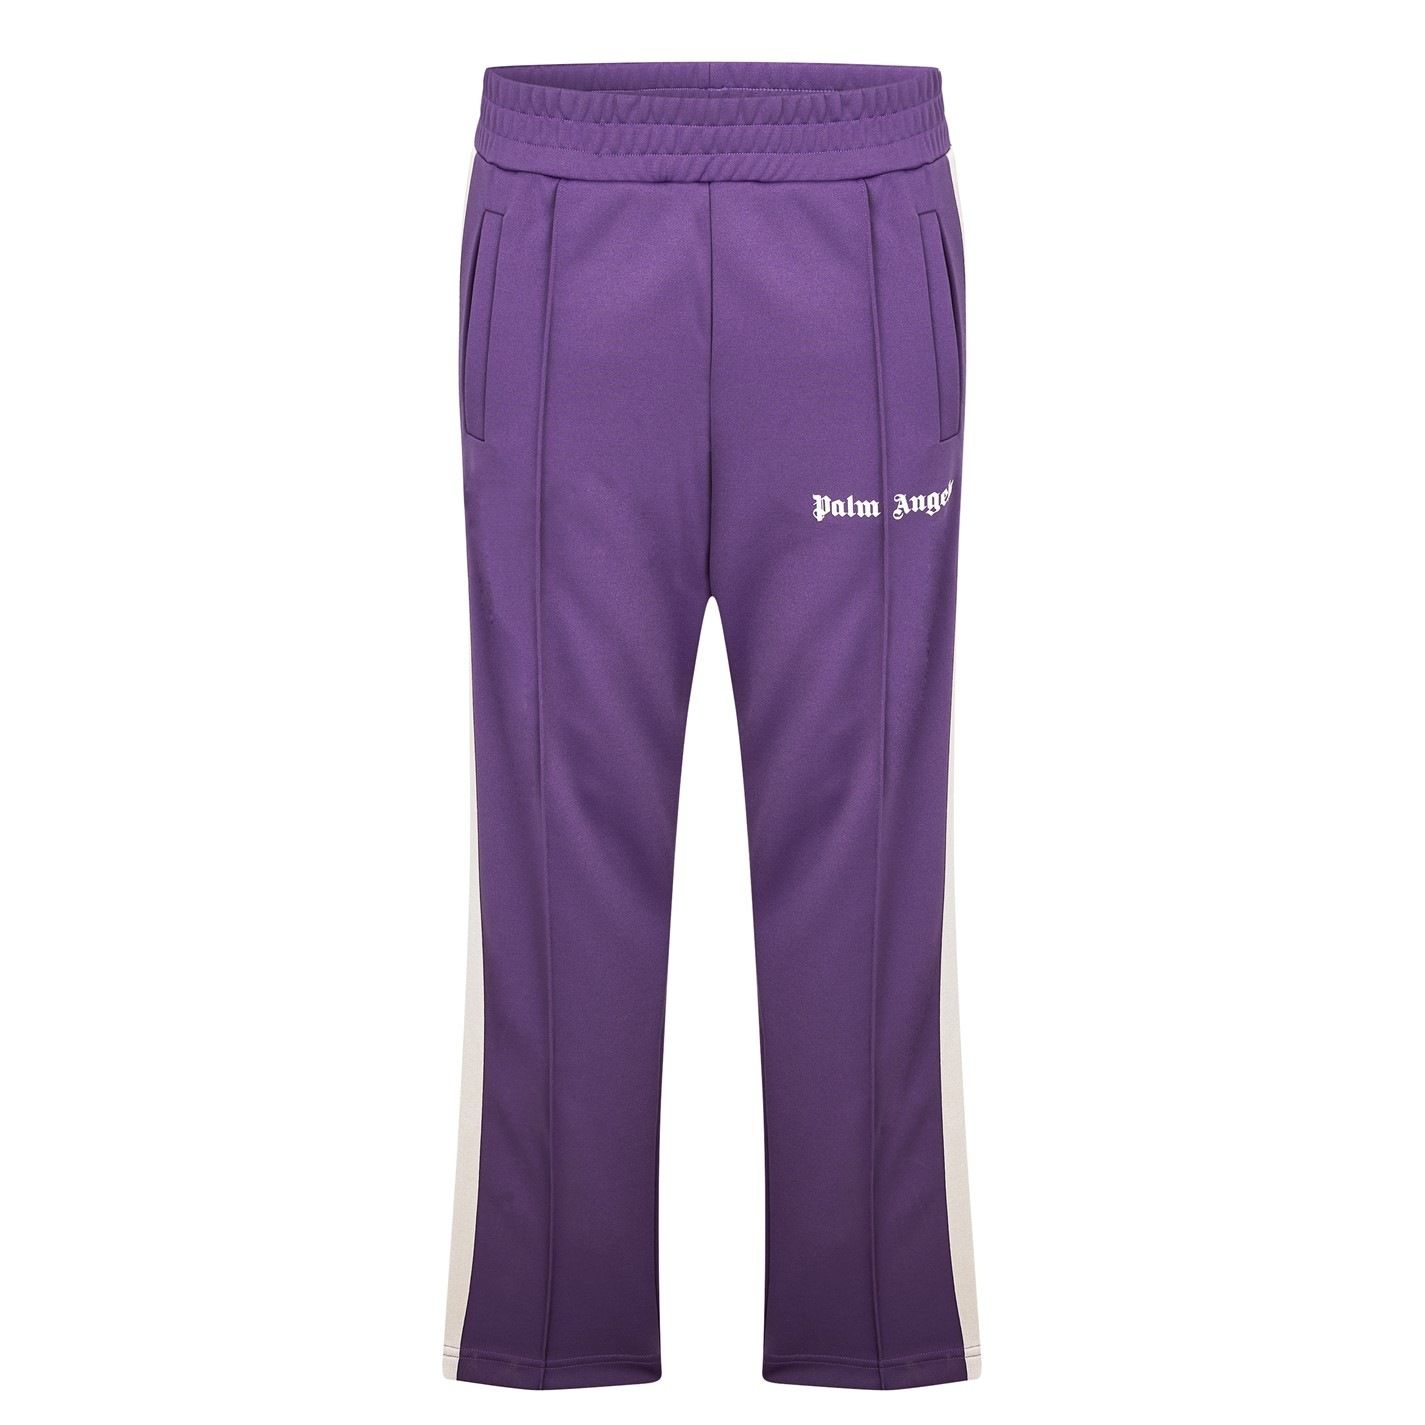 Palm Angels Classic Track Pants in Purple